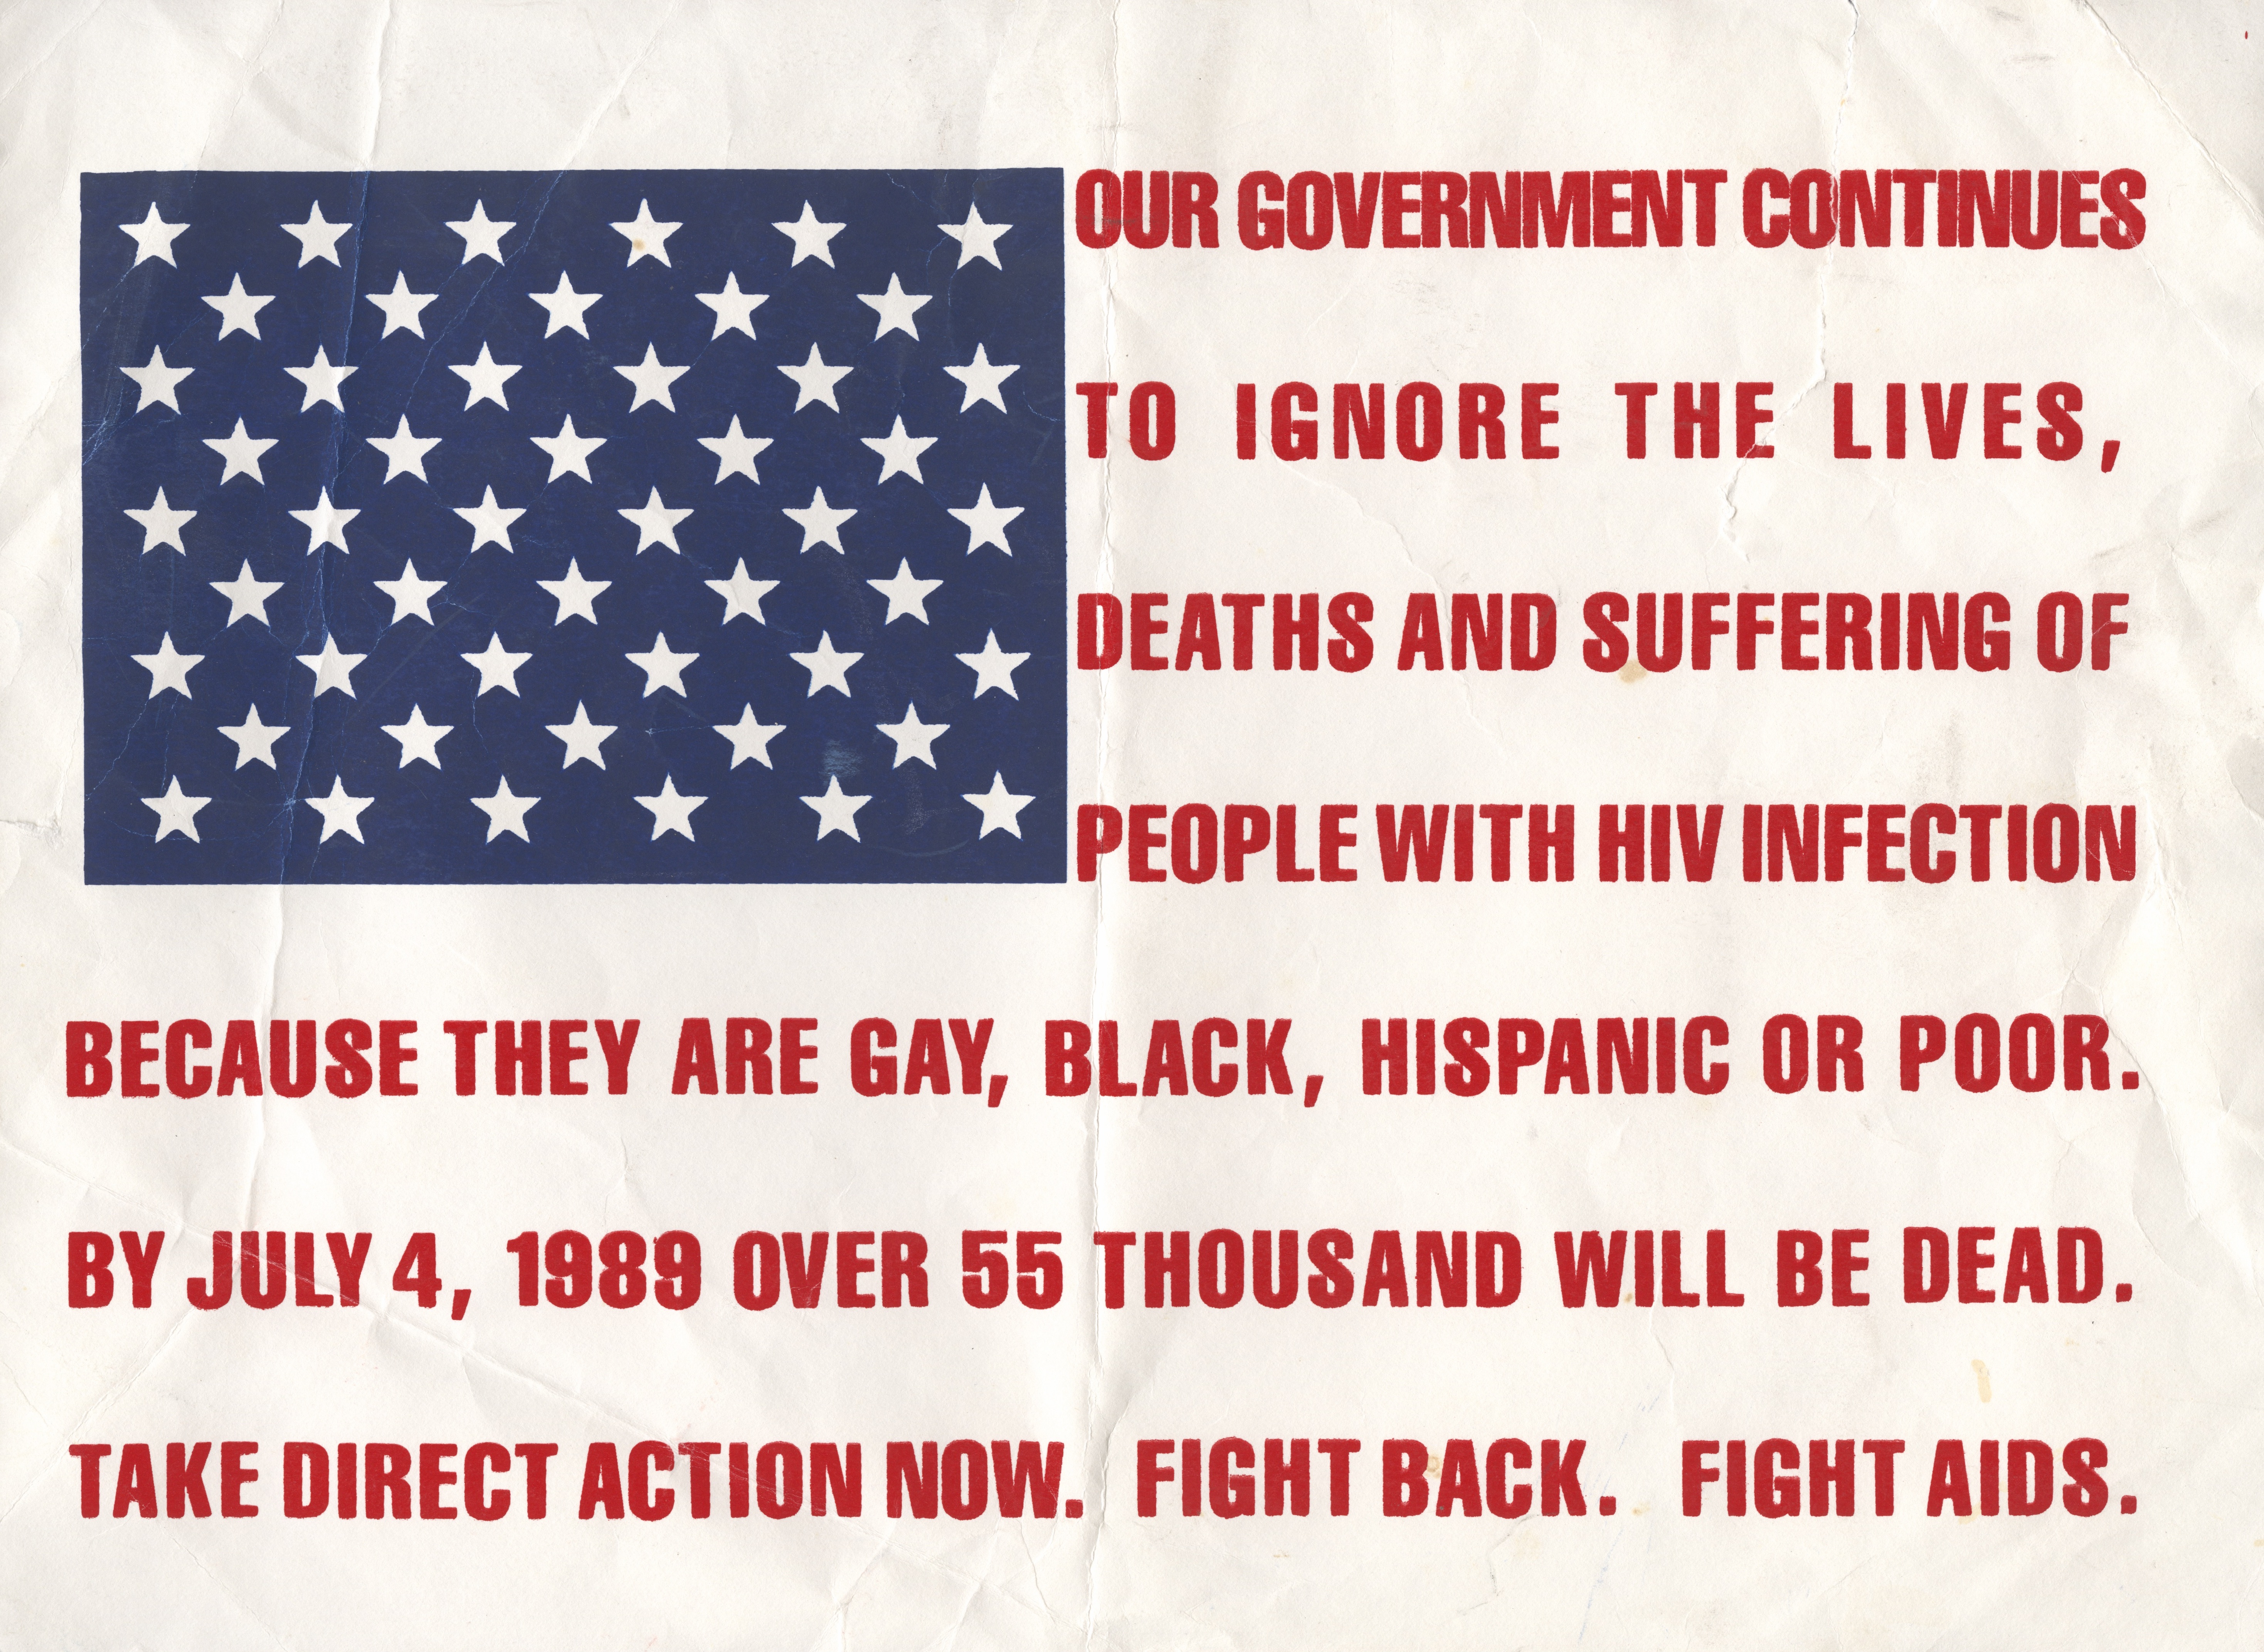 Act-Up flag, circa 1990-1991, David Lowe papers, Stuart A. Rose Manuscript Archives and Rare Book Library, Emory University.